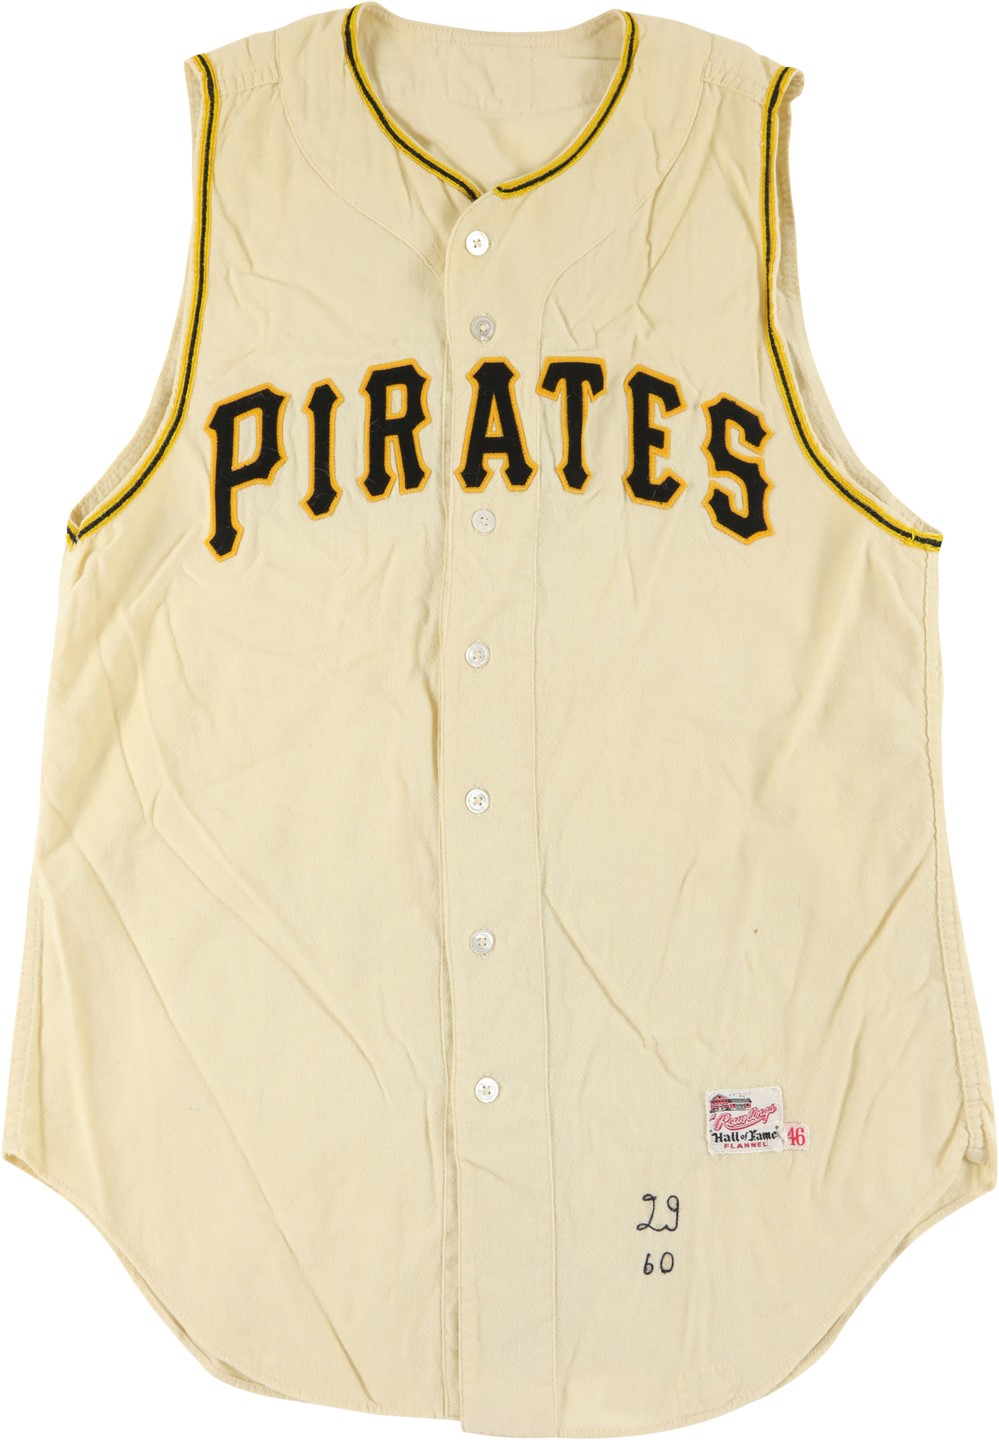 1960 Clem Labine and Others Pittsburgh Pirates Game Worn Jersey